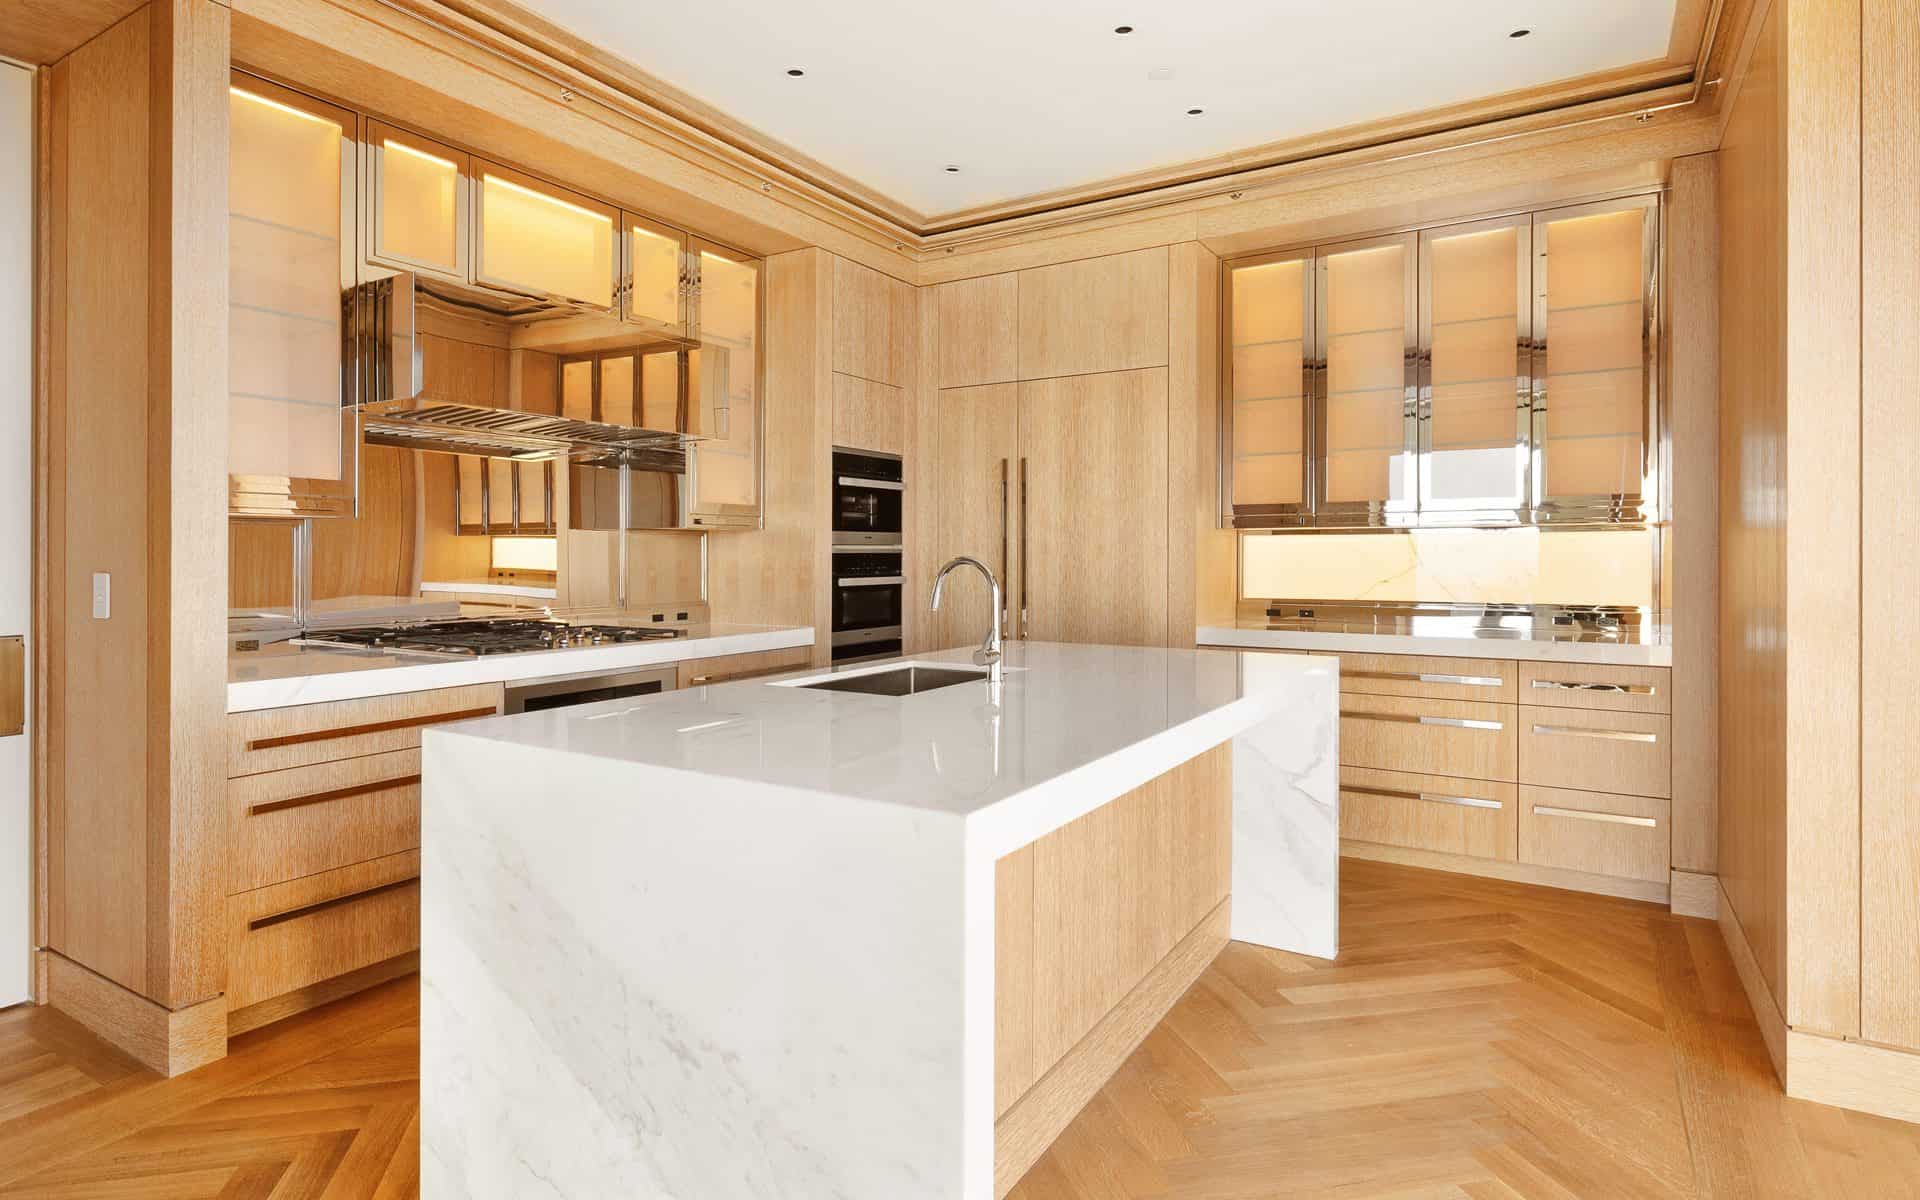 Modern condo kitchen features white marble waterfall island, custom light wood Bilotta cabinets and chrome accents